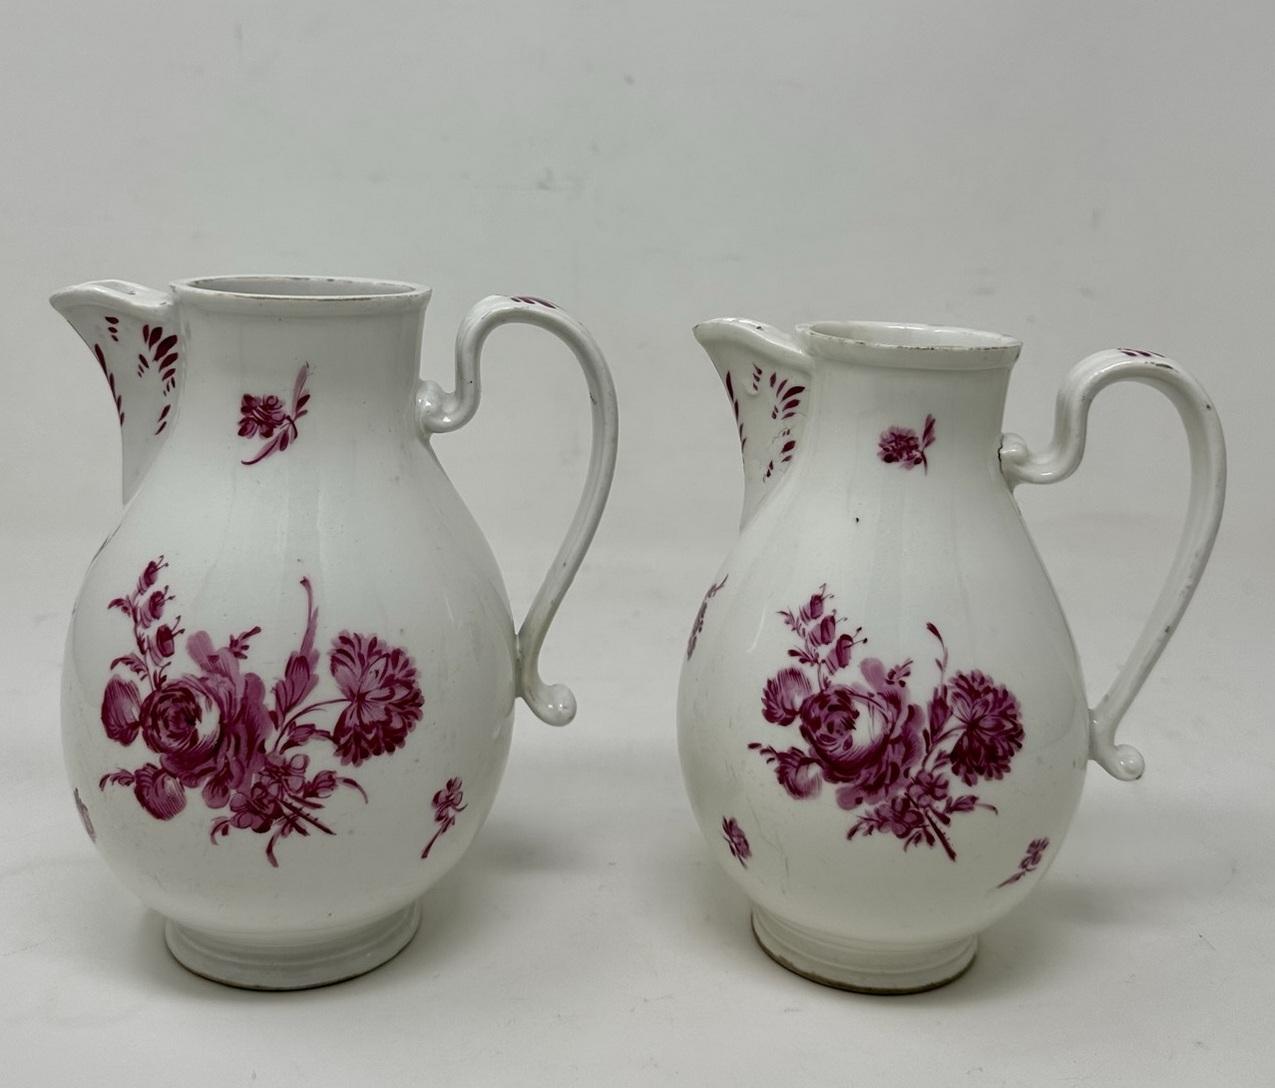 An Extremely rare pair of early Royal Vienna Porcelain Hand decorated Milk and Cream Pitchers or Jugs of medium proportion and outstanding workmanship, both of traditional bulbous outline, each with applied “C” scroll handle. Circa first quarter of